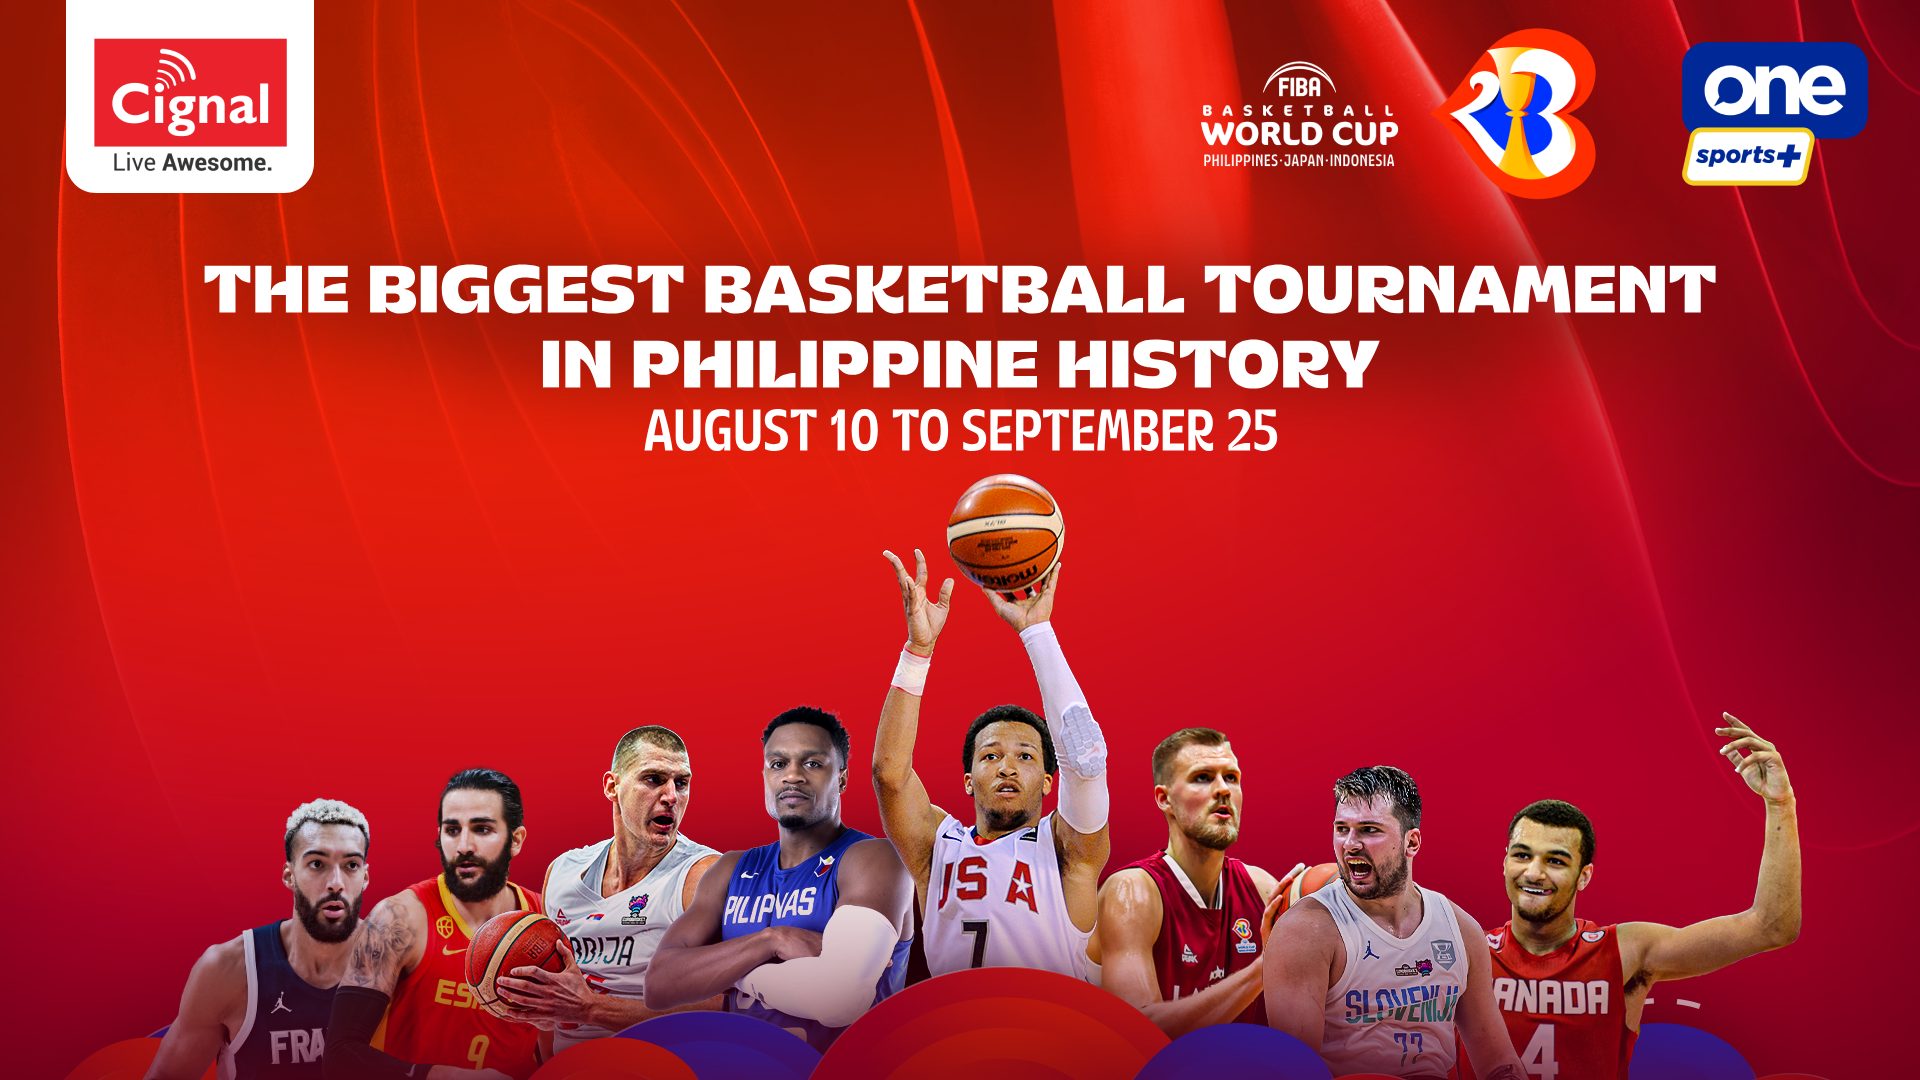 Catch the FIBA Basketball World Cup 2023 and more on Cignal TV